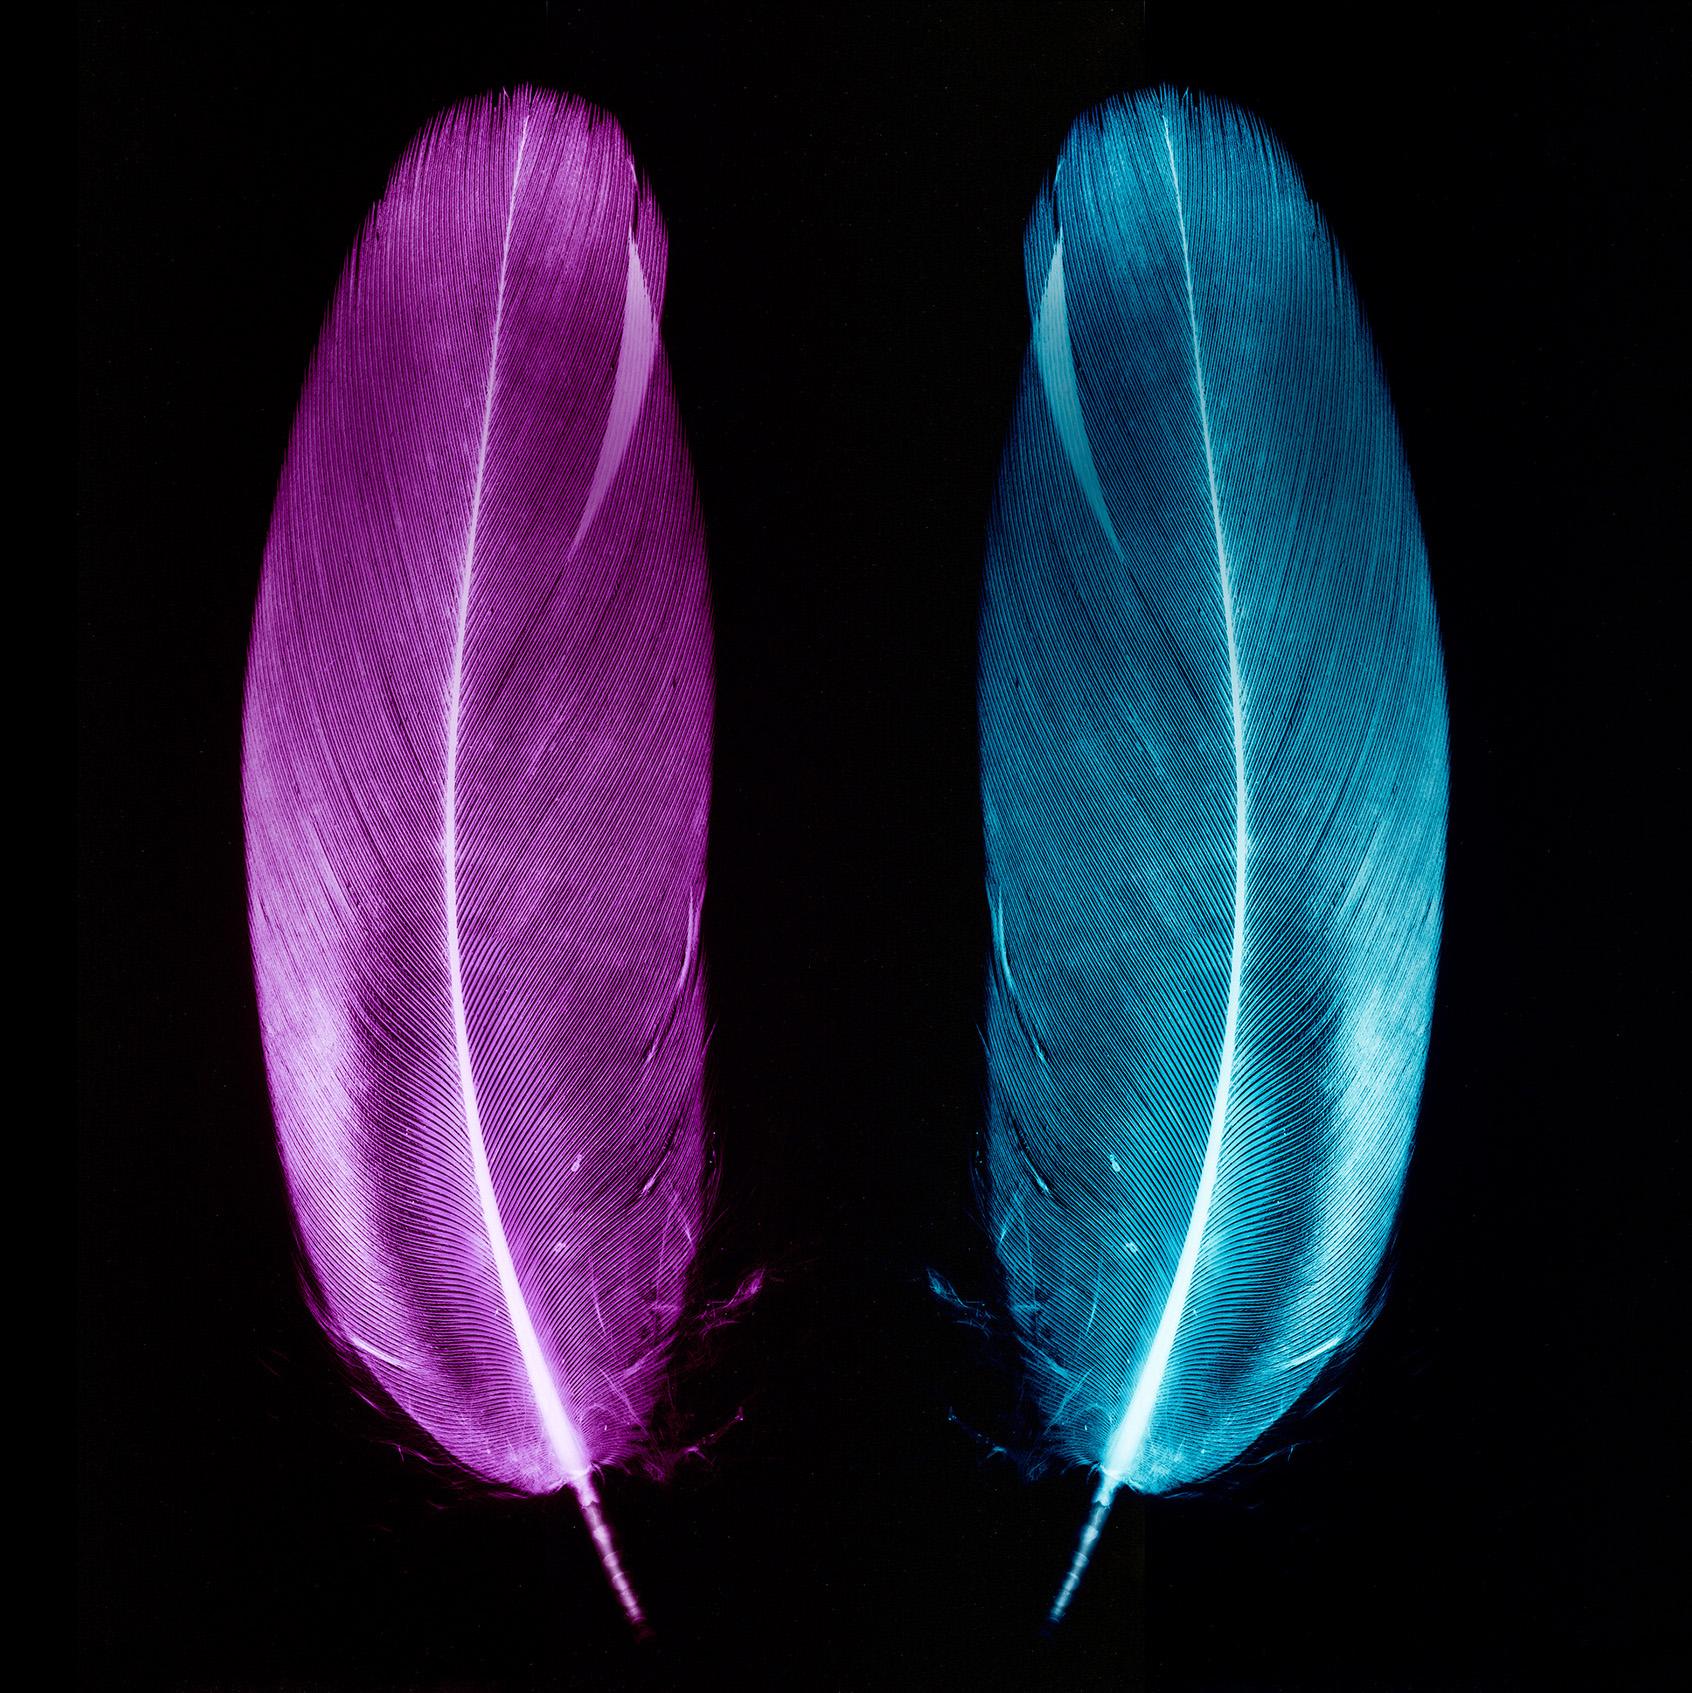 Natasha Heidler Abstract Photograph - Plum & Ice Blue Pair of Feathers - Conceptual, Color Photography